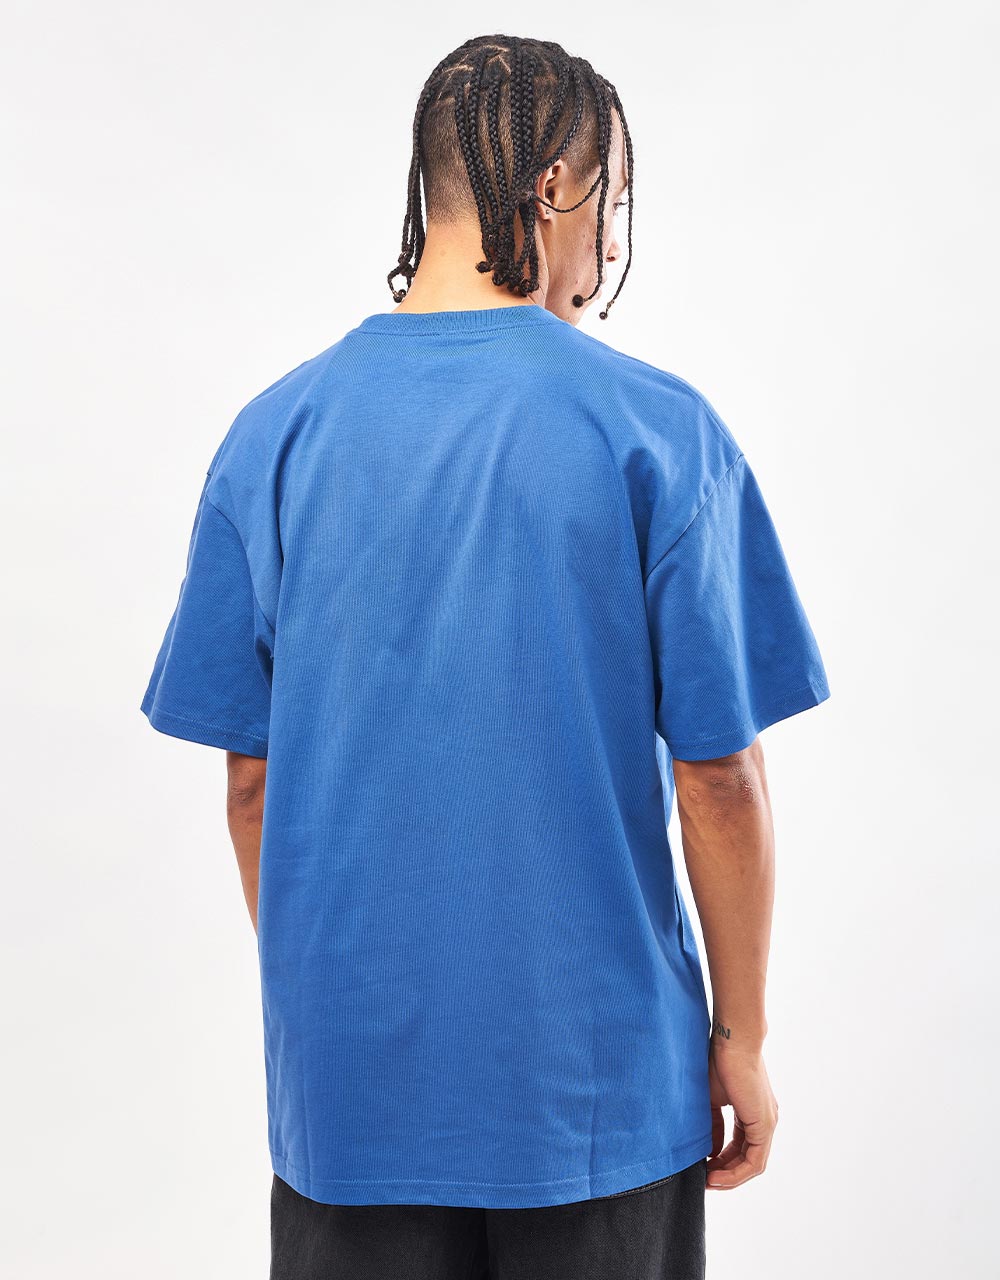 Carhartt WIP Chase T-Shirt - Acapulco/Gold